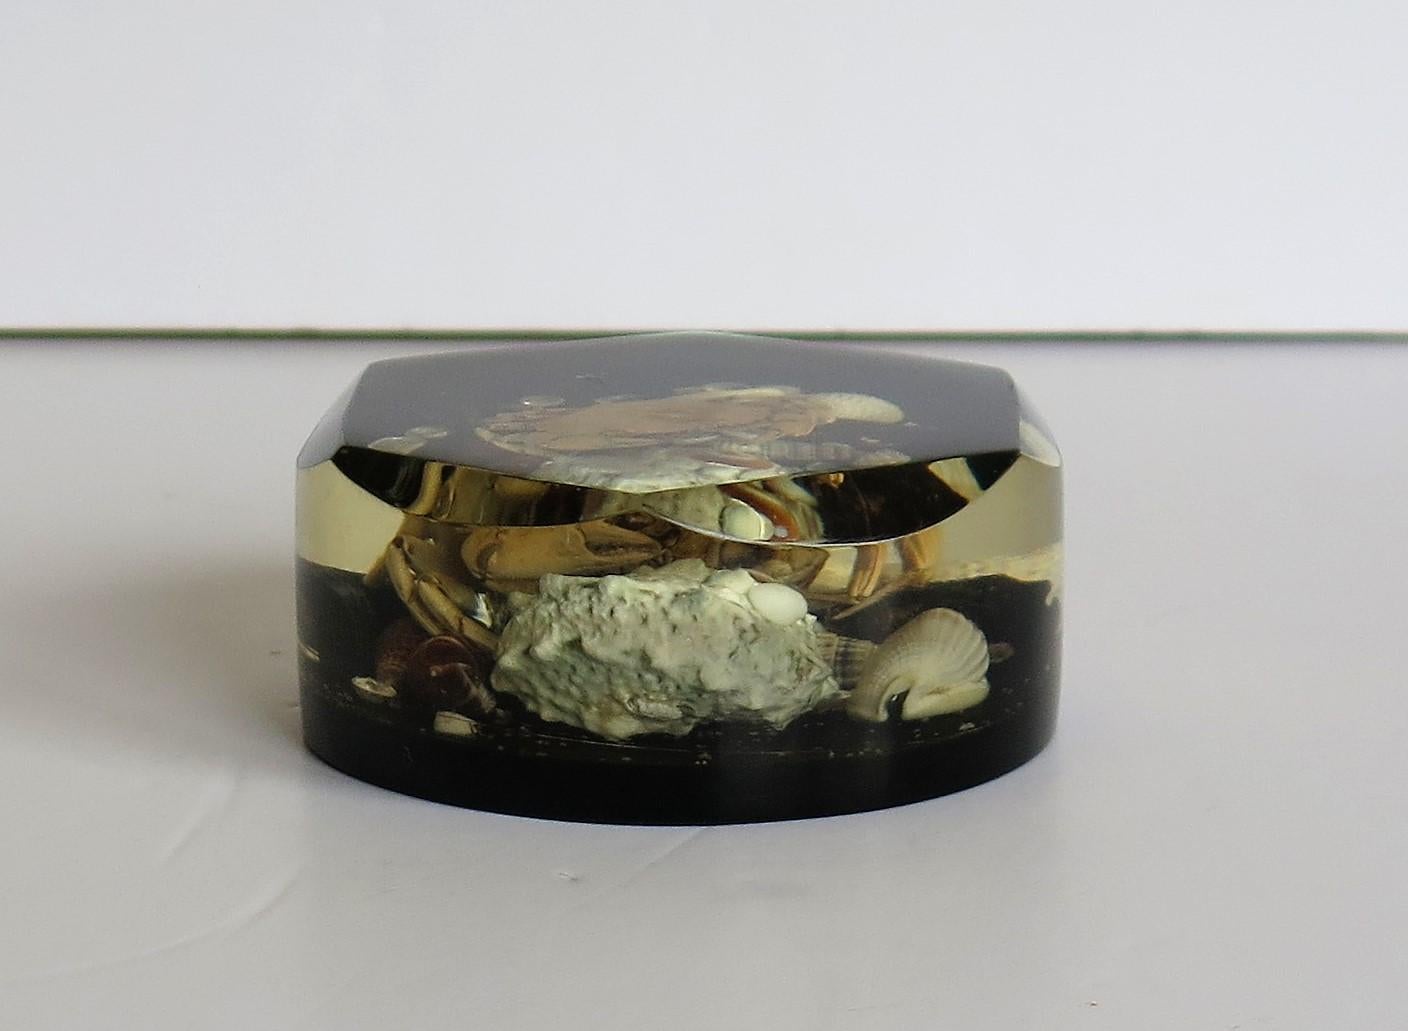 Hand-Crafted Paperweight with Seashore Theme Handmade with Real Sea Shells & Crab, circa 1970